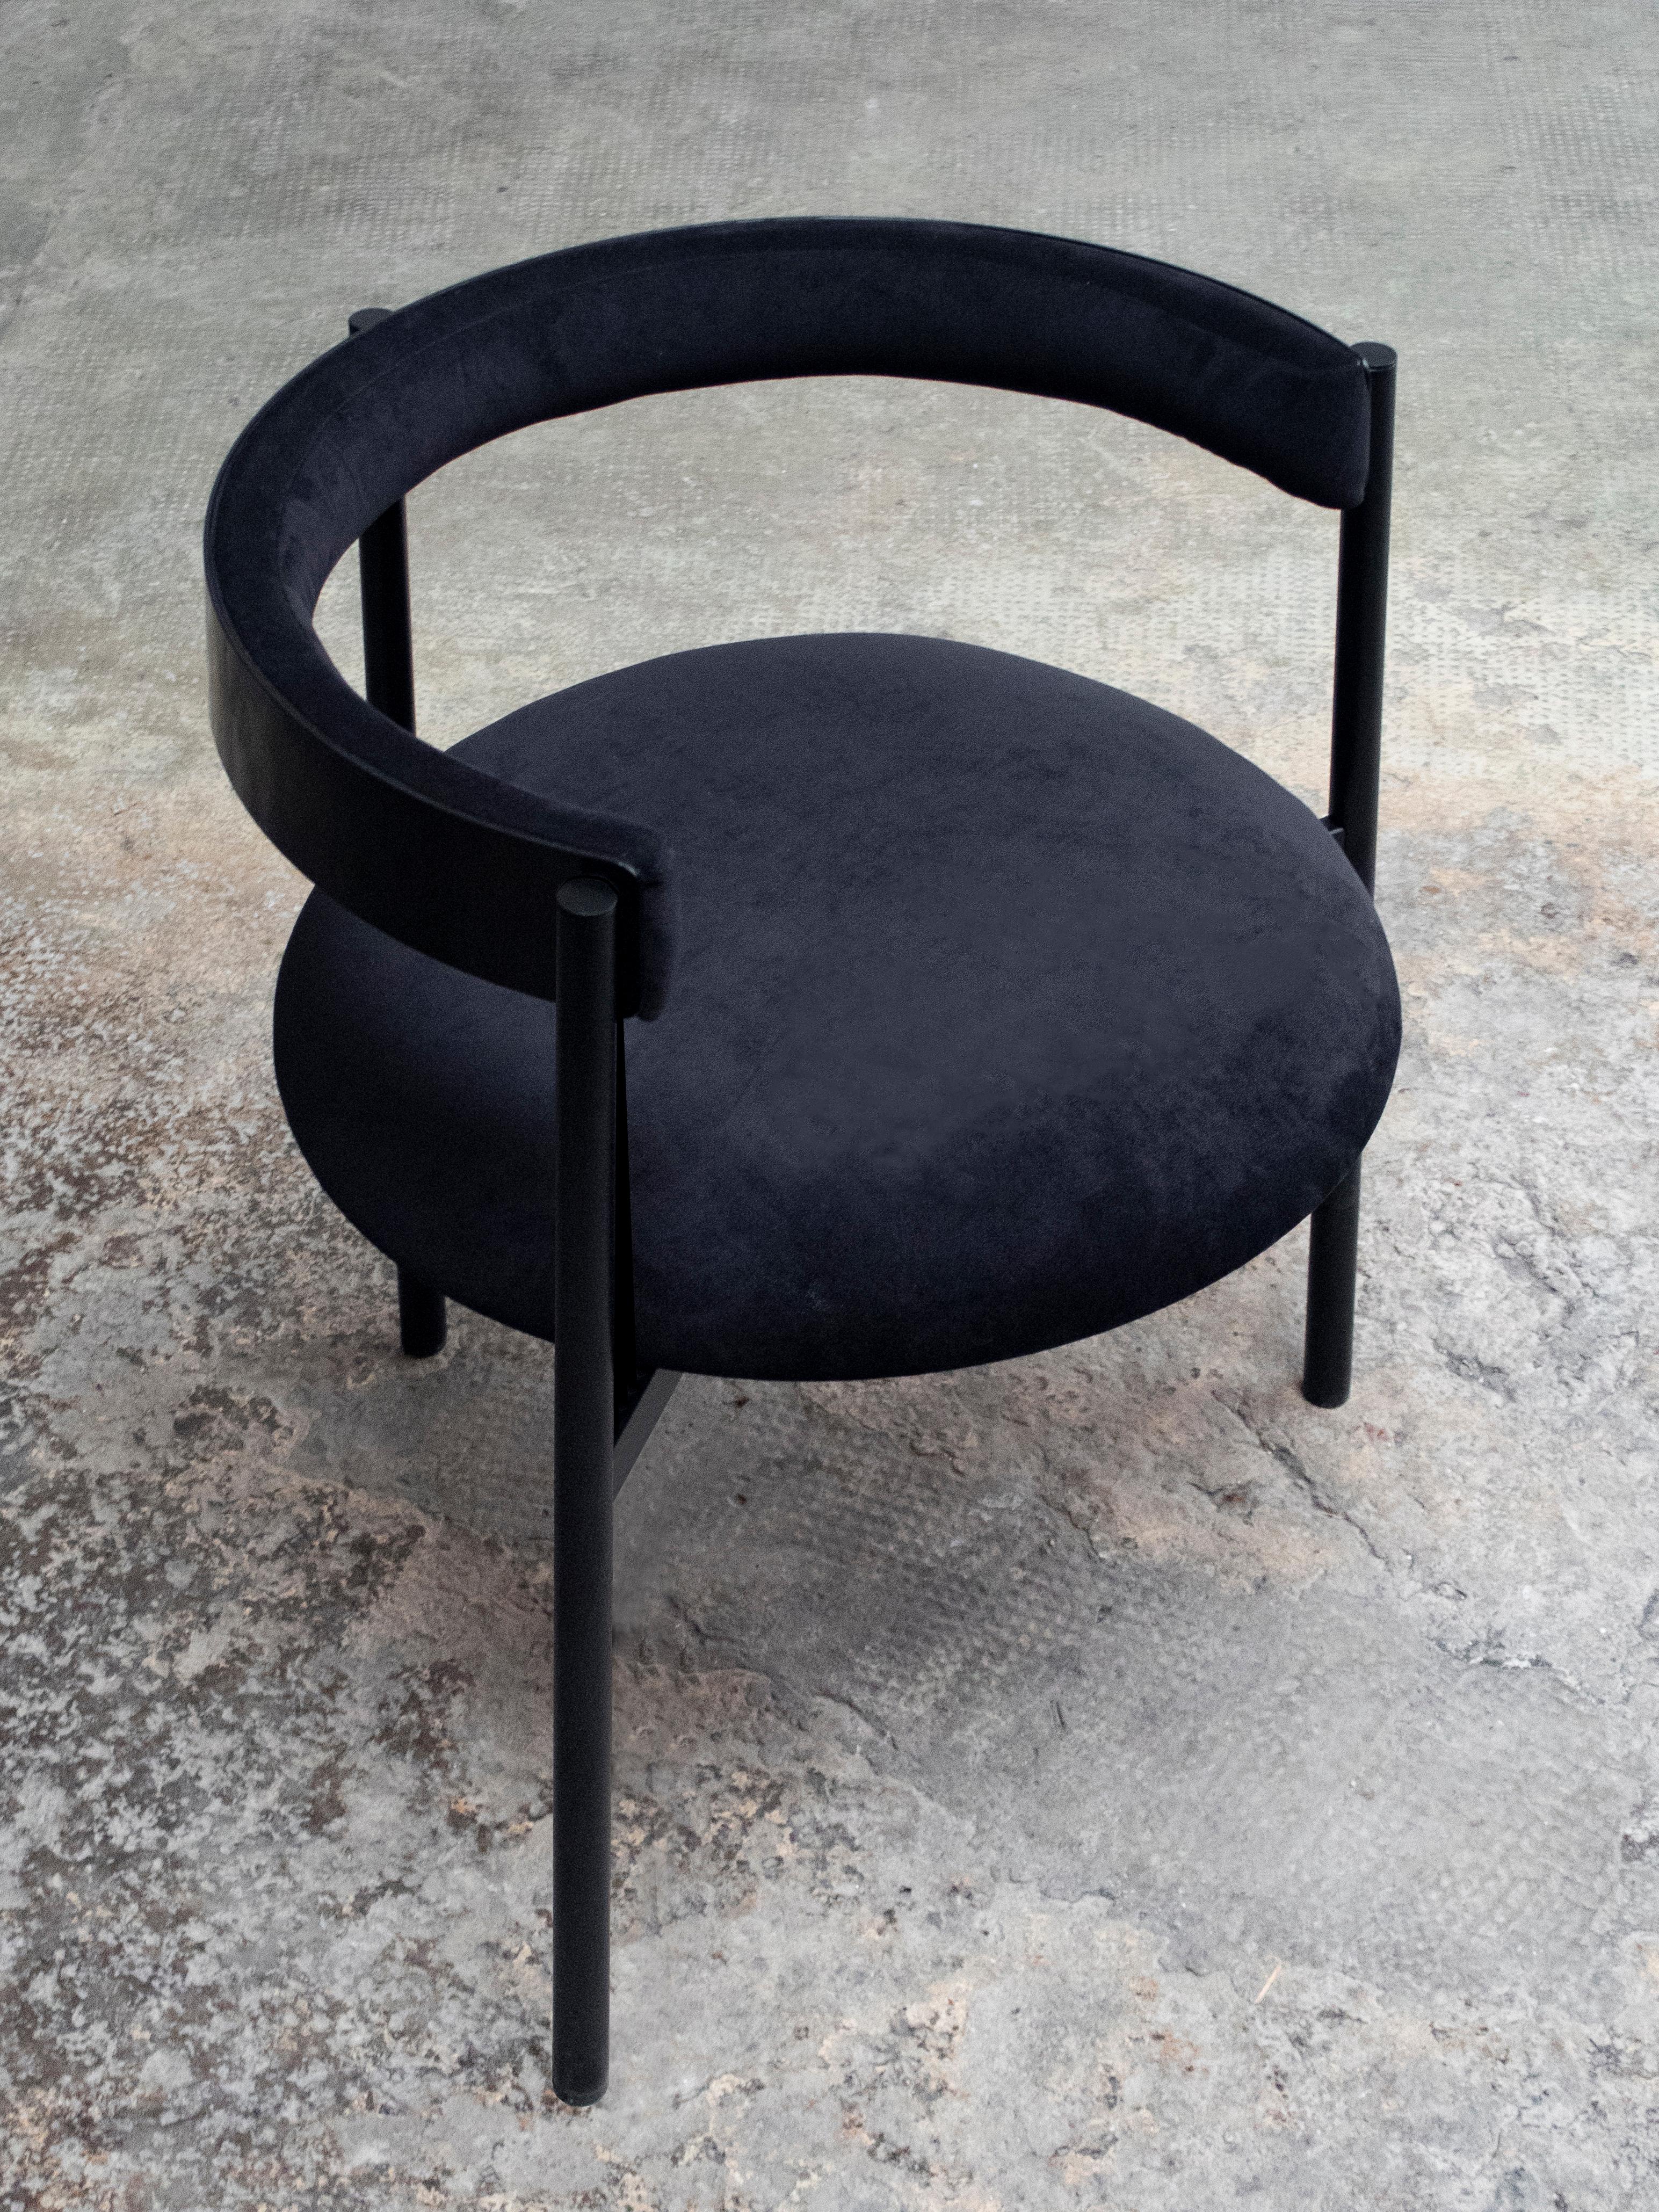 Argentine Set of 2 Aro Chairs, Black by Ries